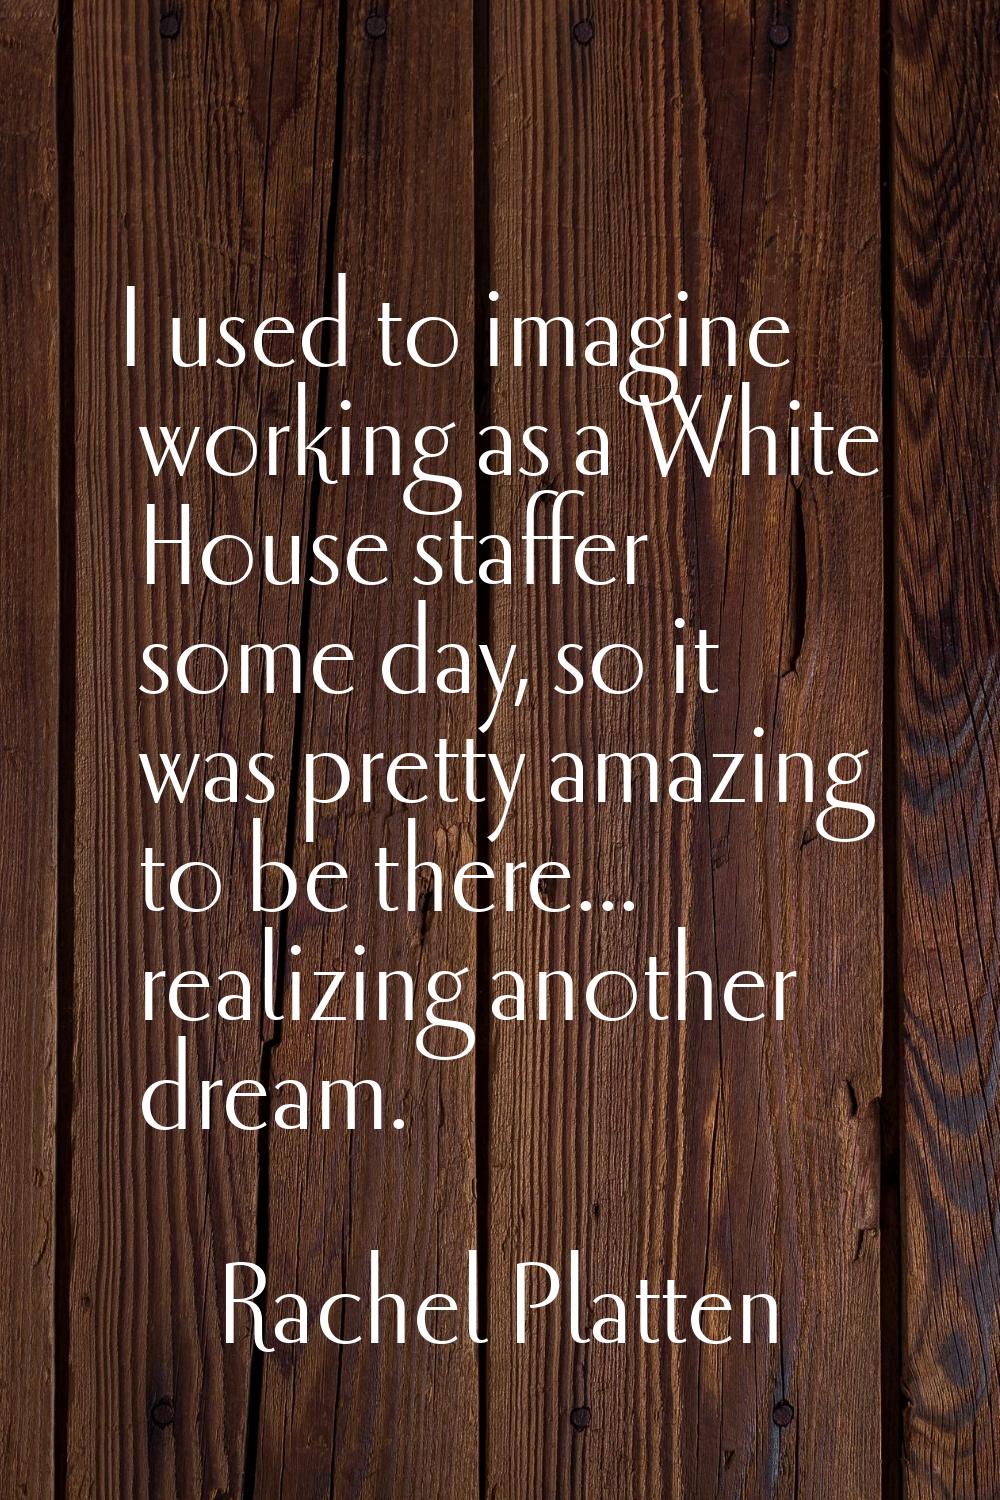 I used to imagine working as a White House staffer some day, so it was pretty amazing to be there..